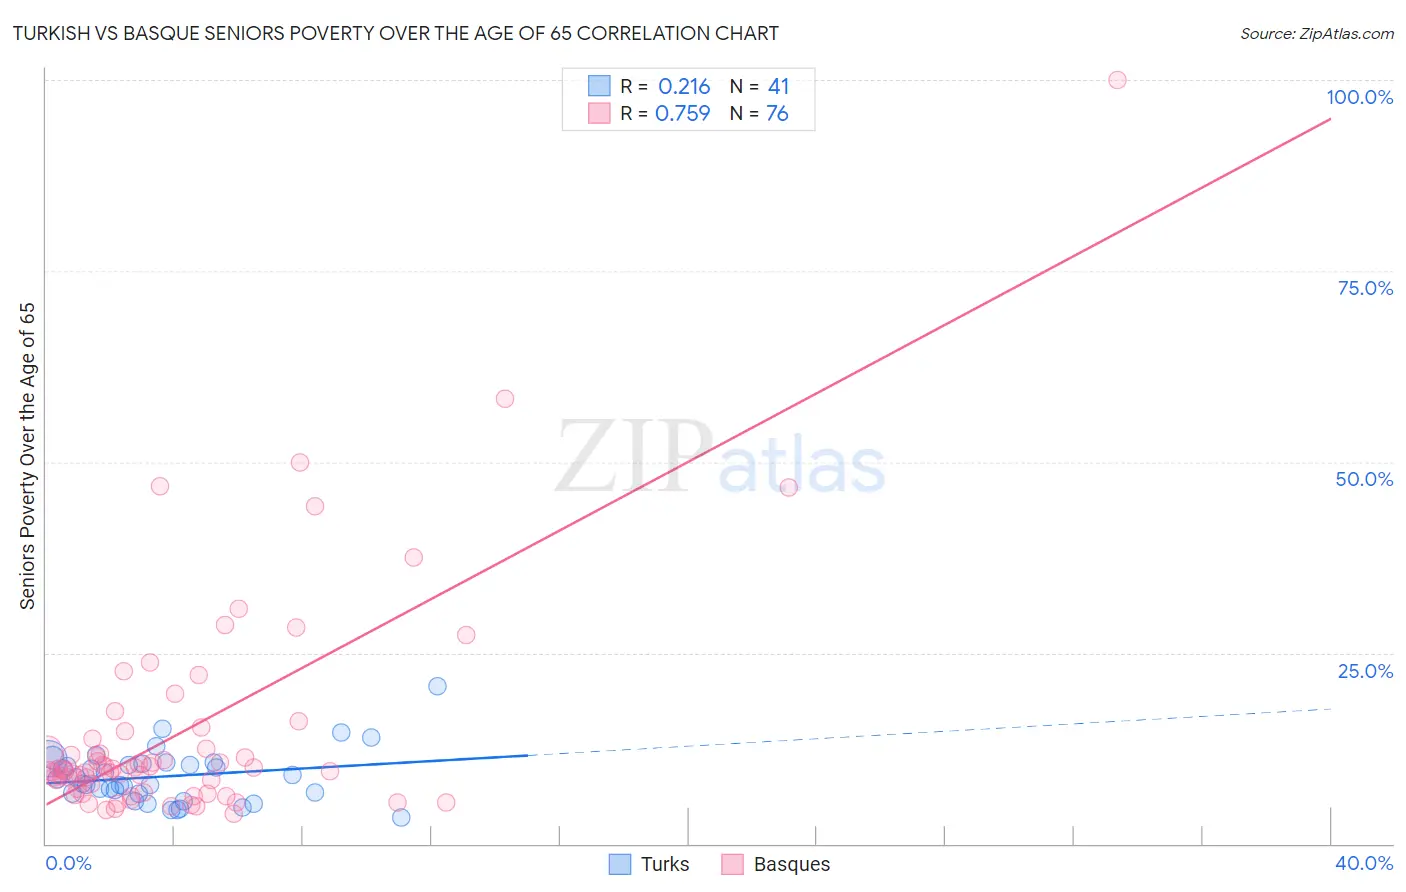 Turkish vs Basque Seniors Poverty Over the Age of 65